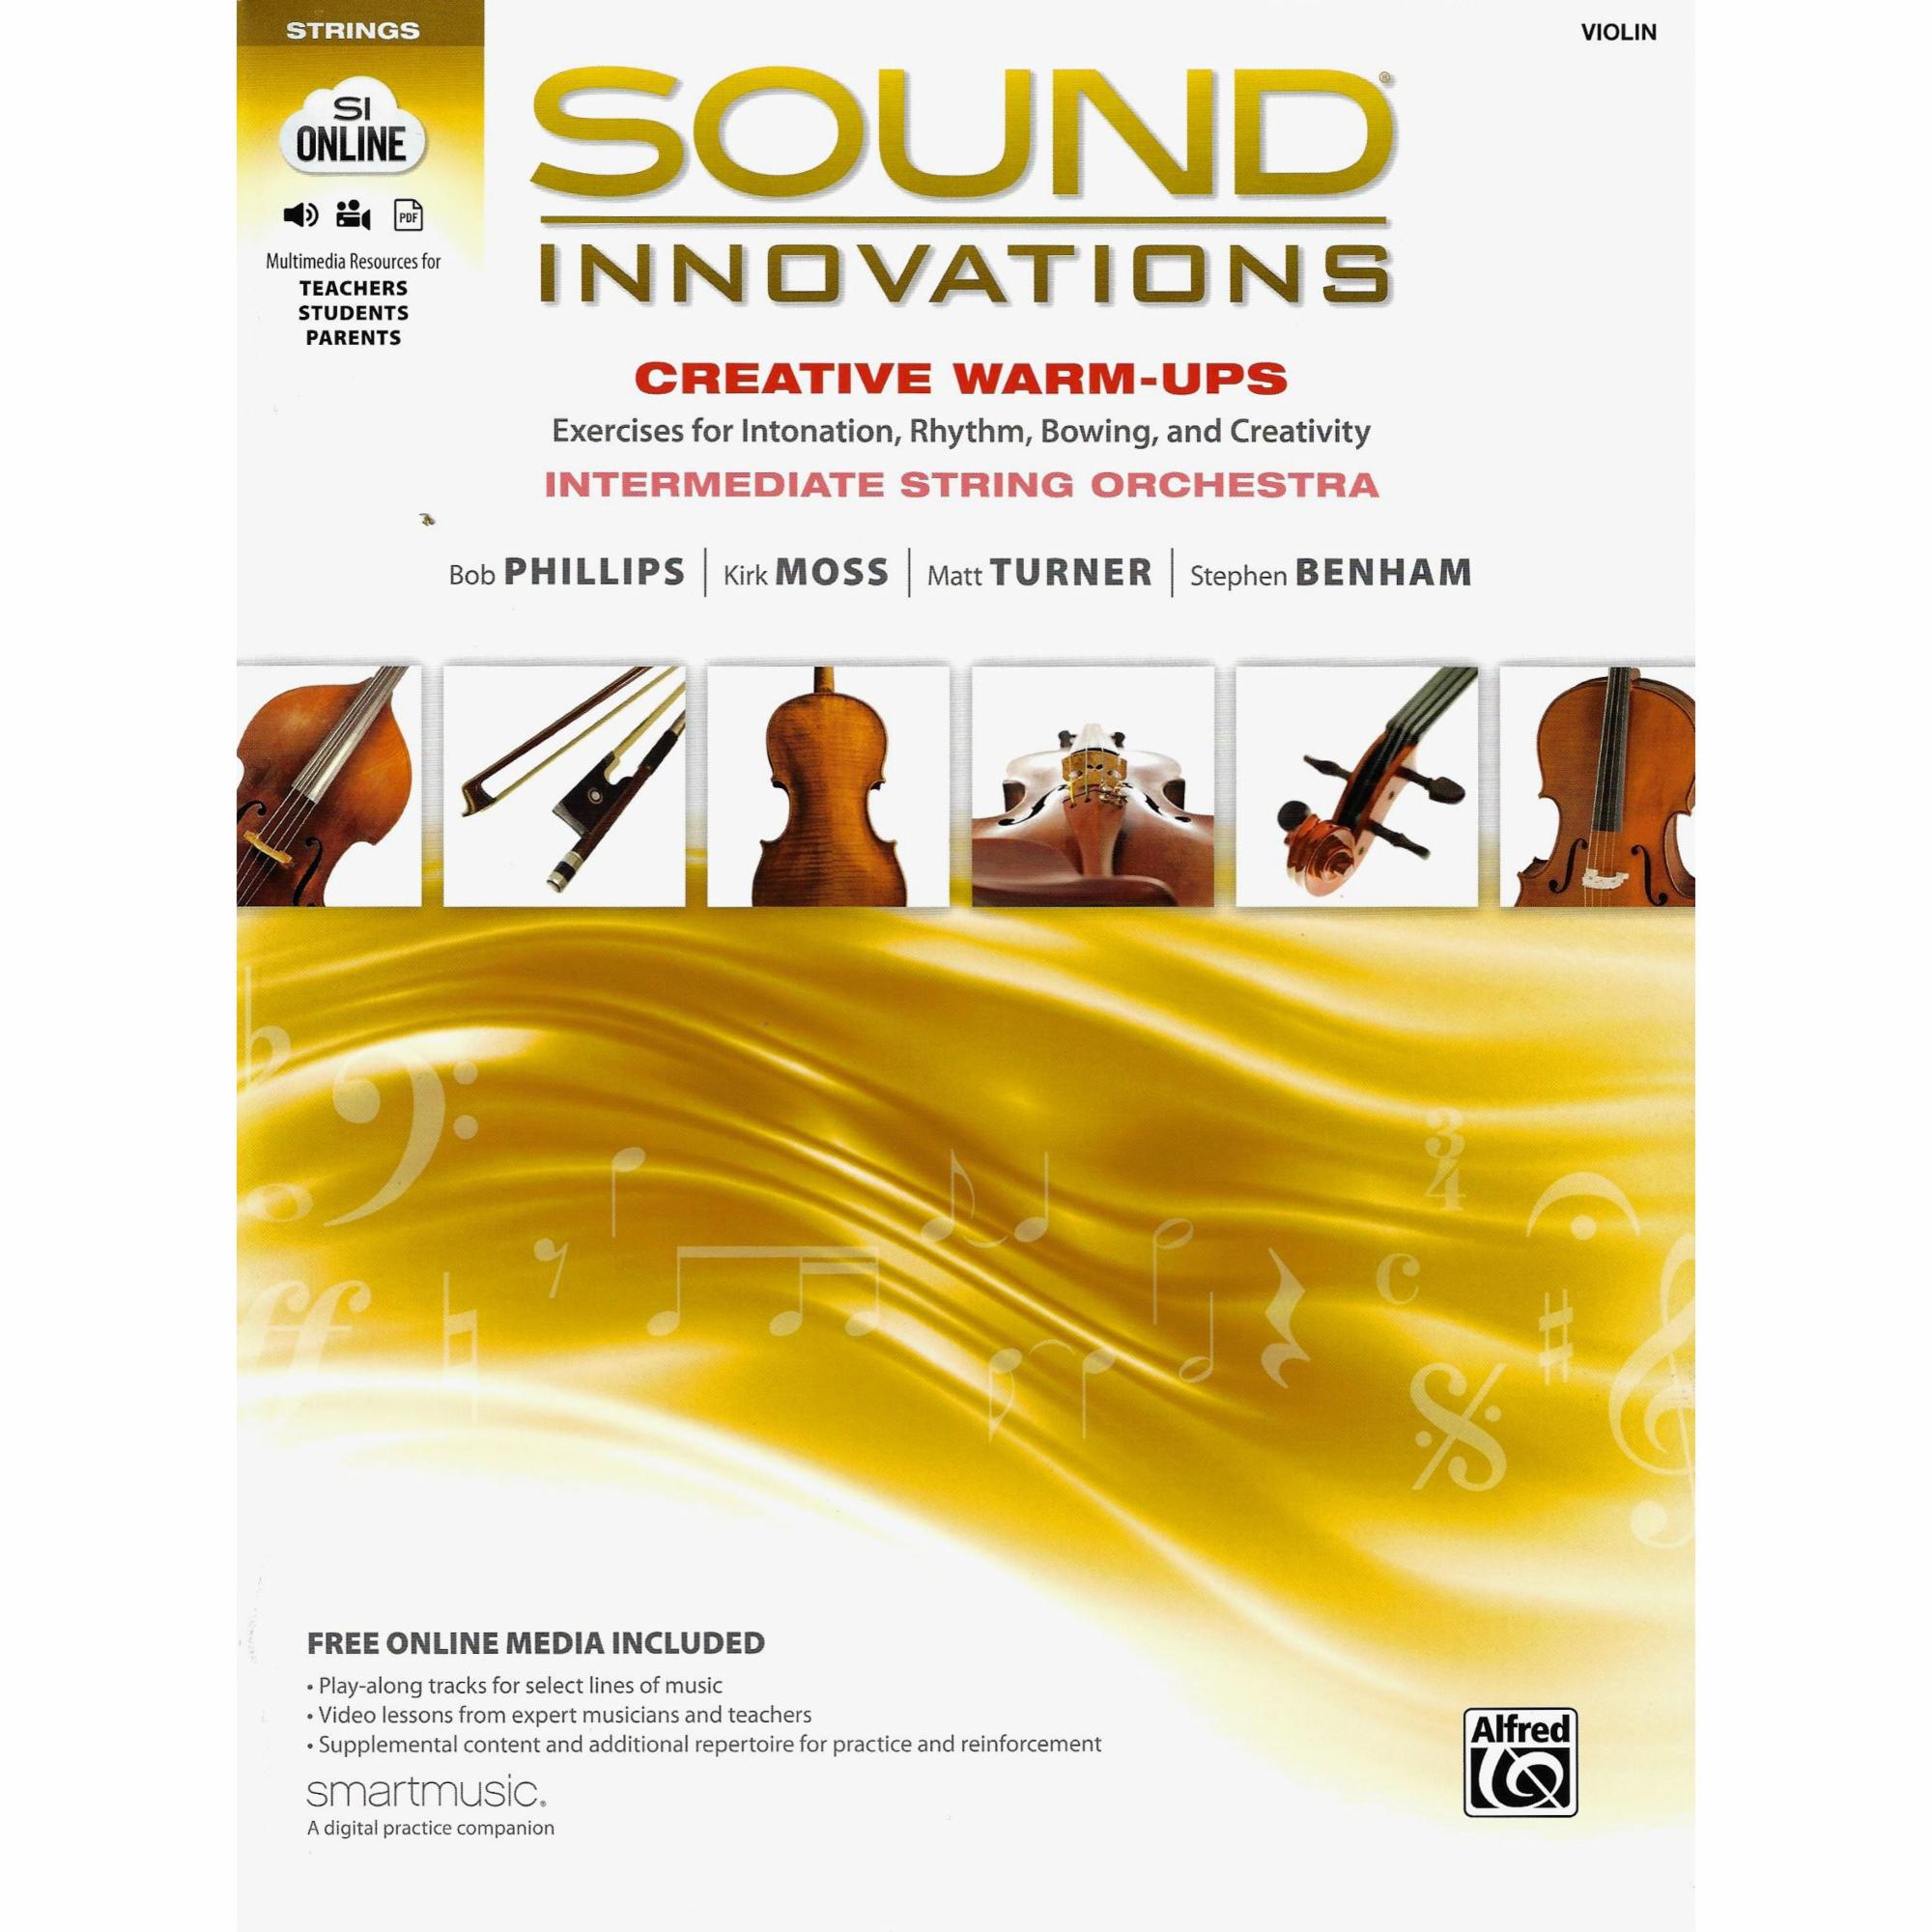 Sound Innovations: Creative Warm-Ups for Intermediate Strings